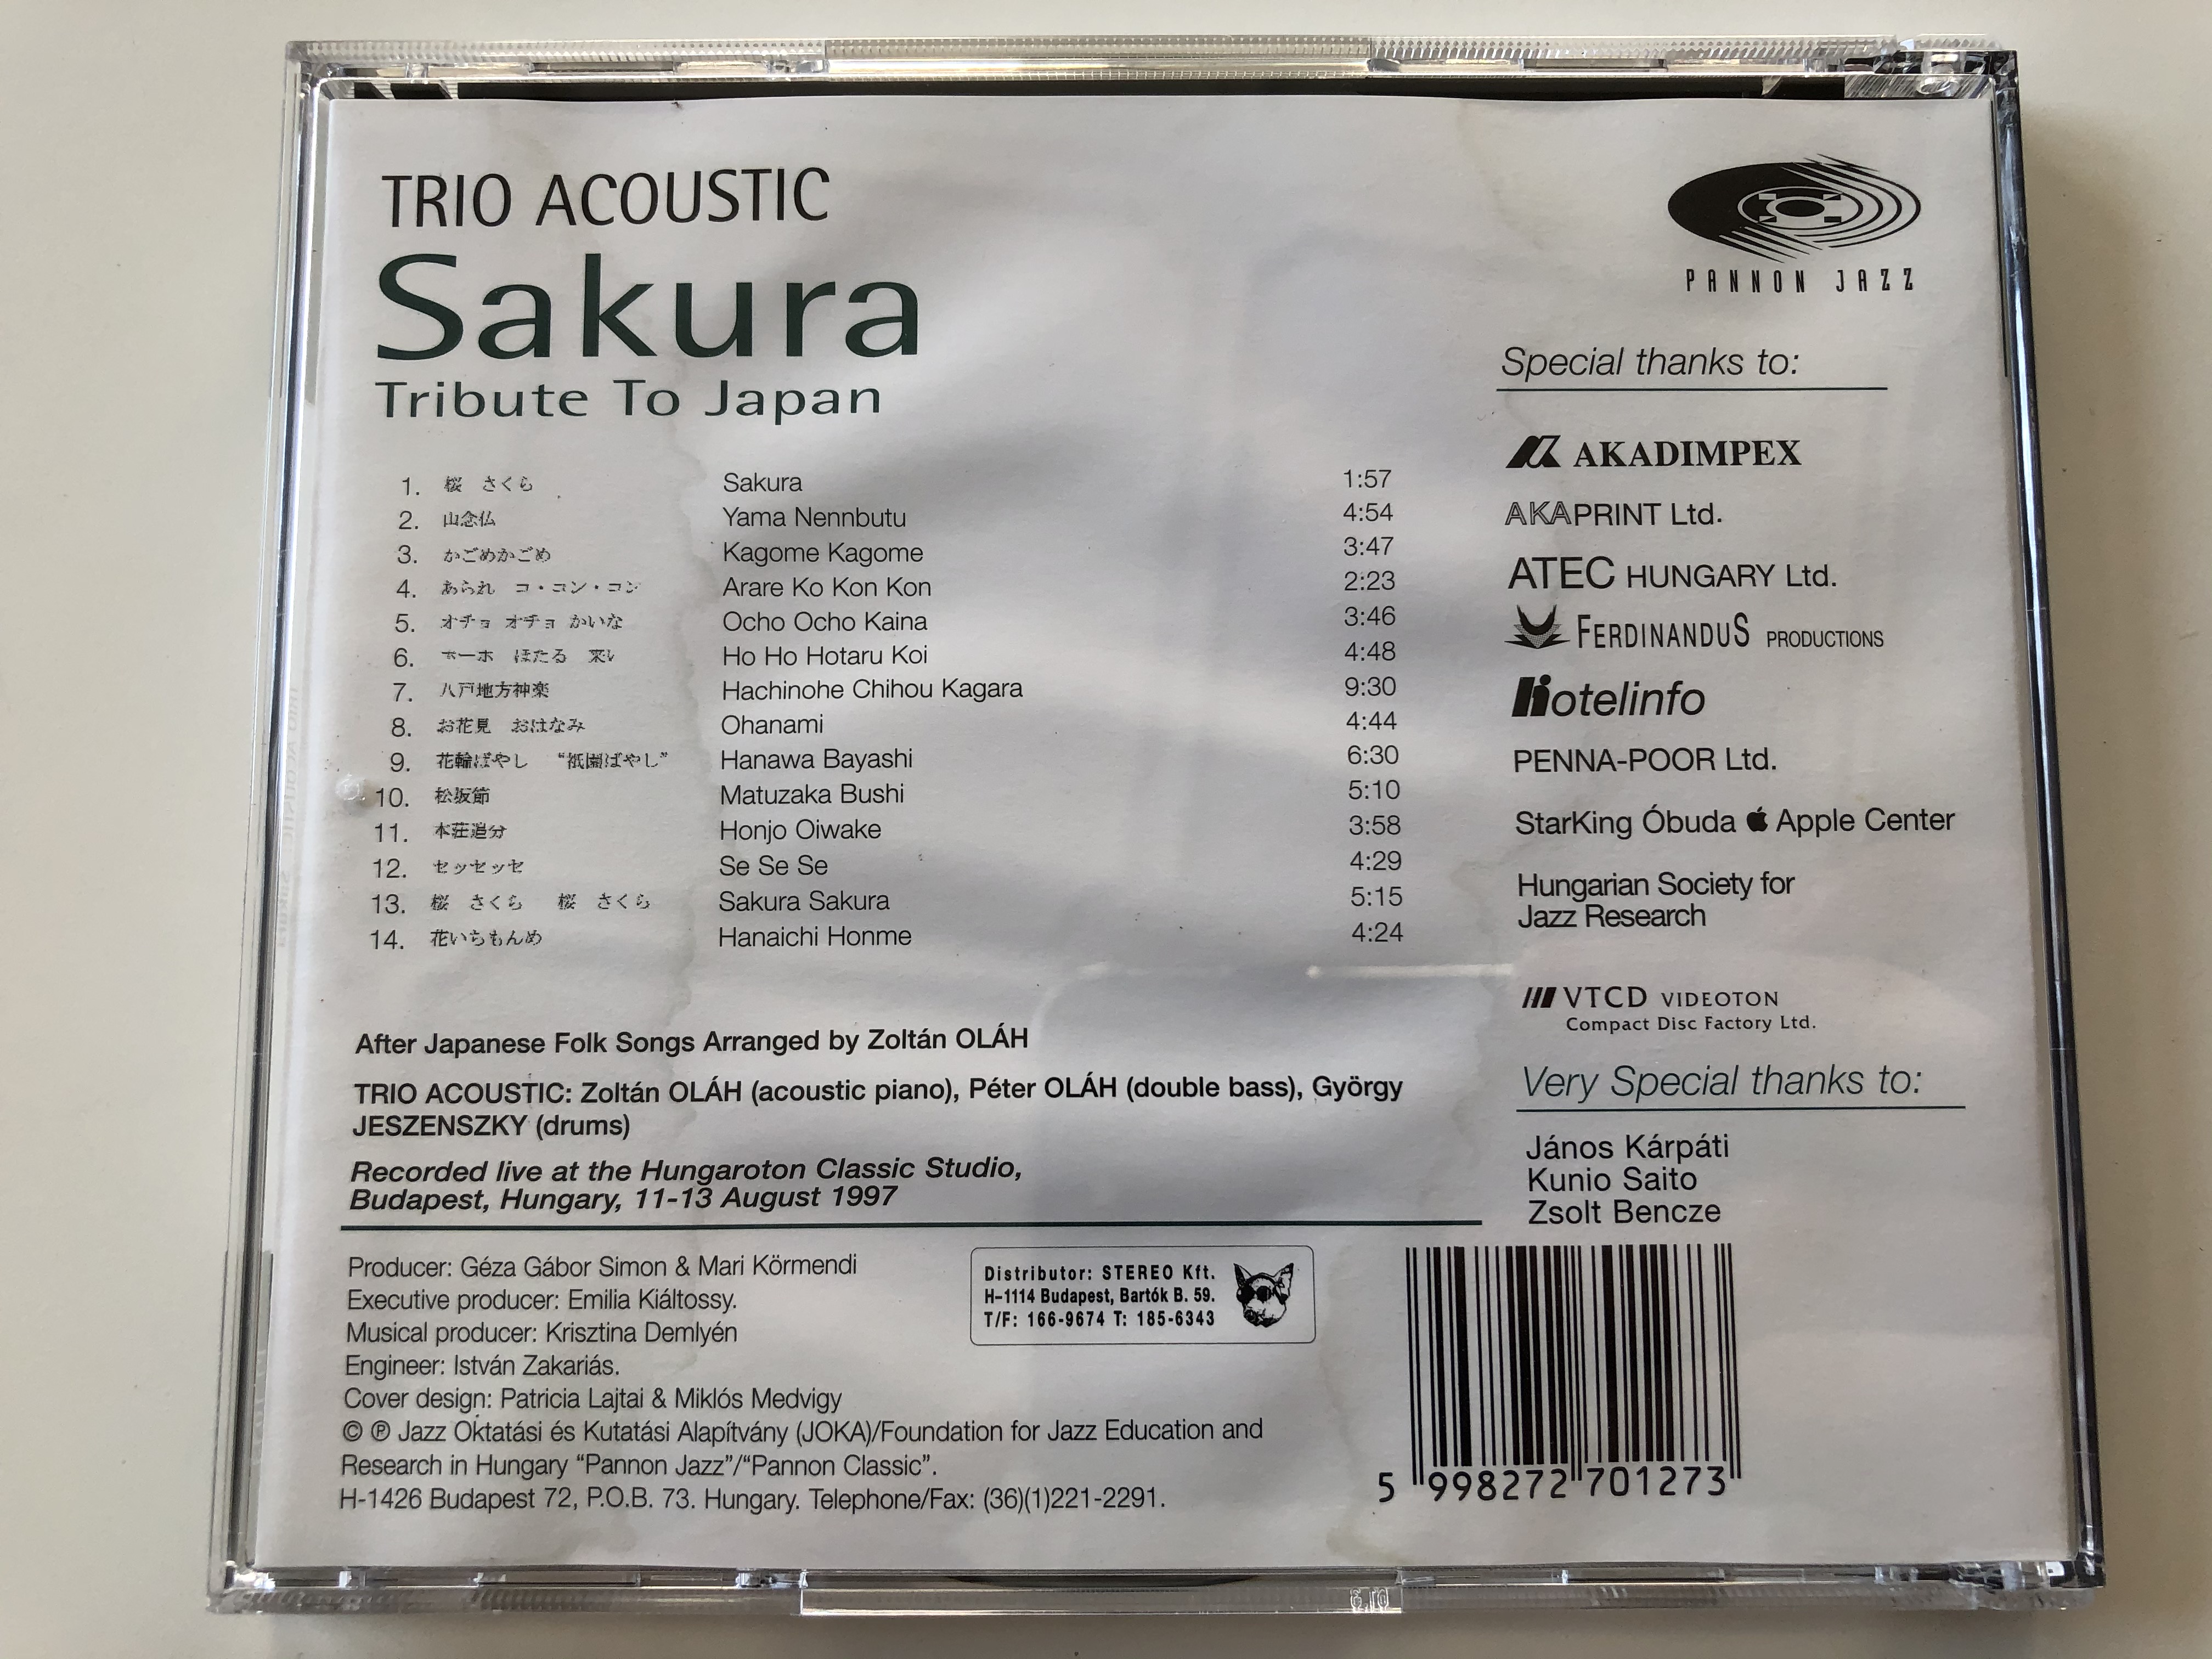 foundation-for-jazz-education-and-research-in-hungary-presents-trio-acoustic-sakura-tribute-to-japan-pannon-jazz-audio-cd-1997-pj-1033-6-.jpg